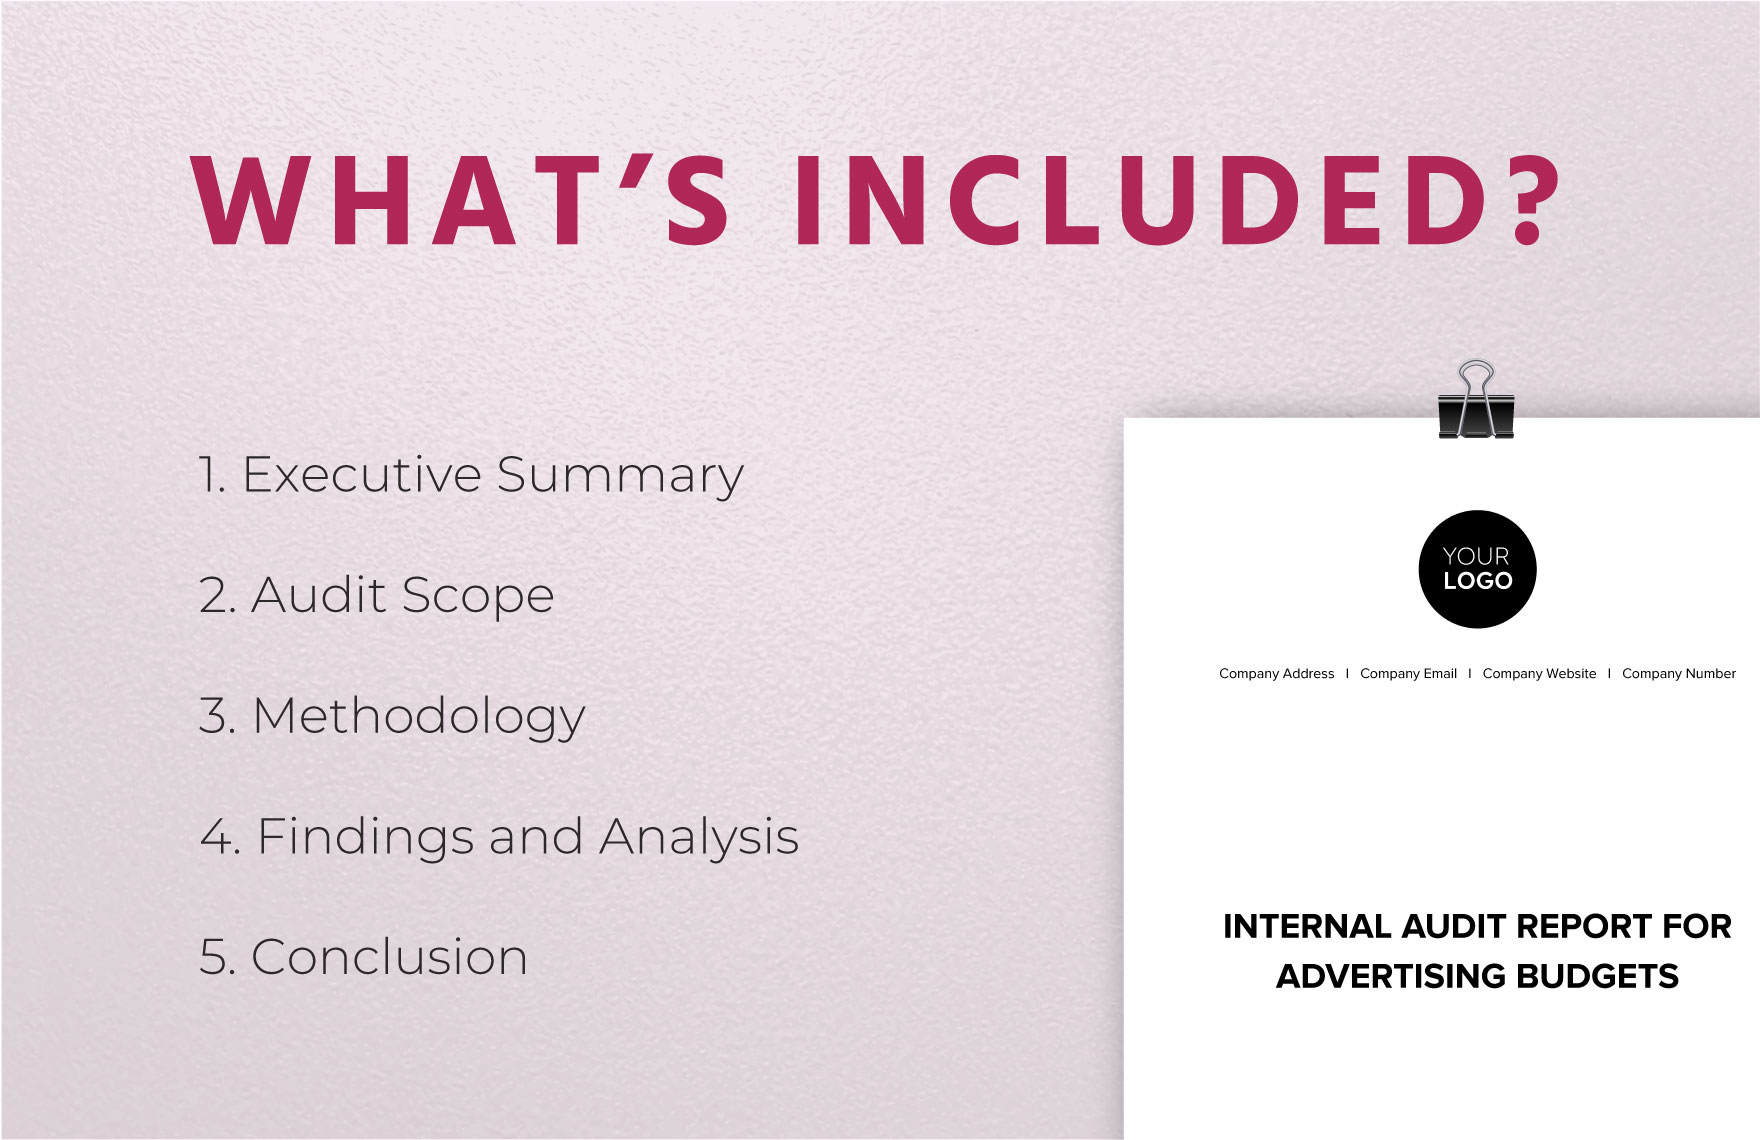 Internal Audit Report for Advertising Budgets Template